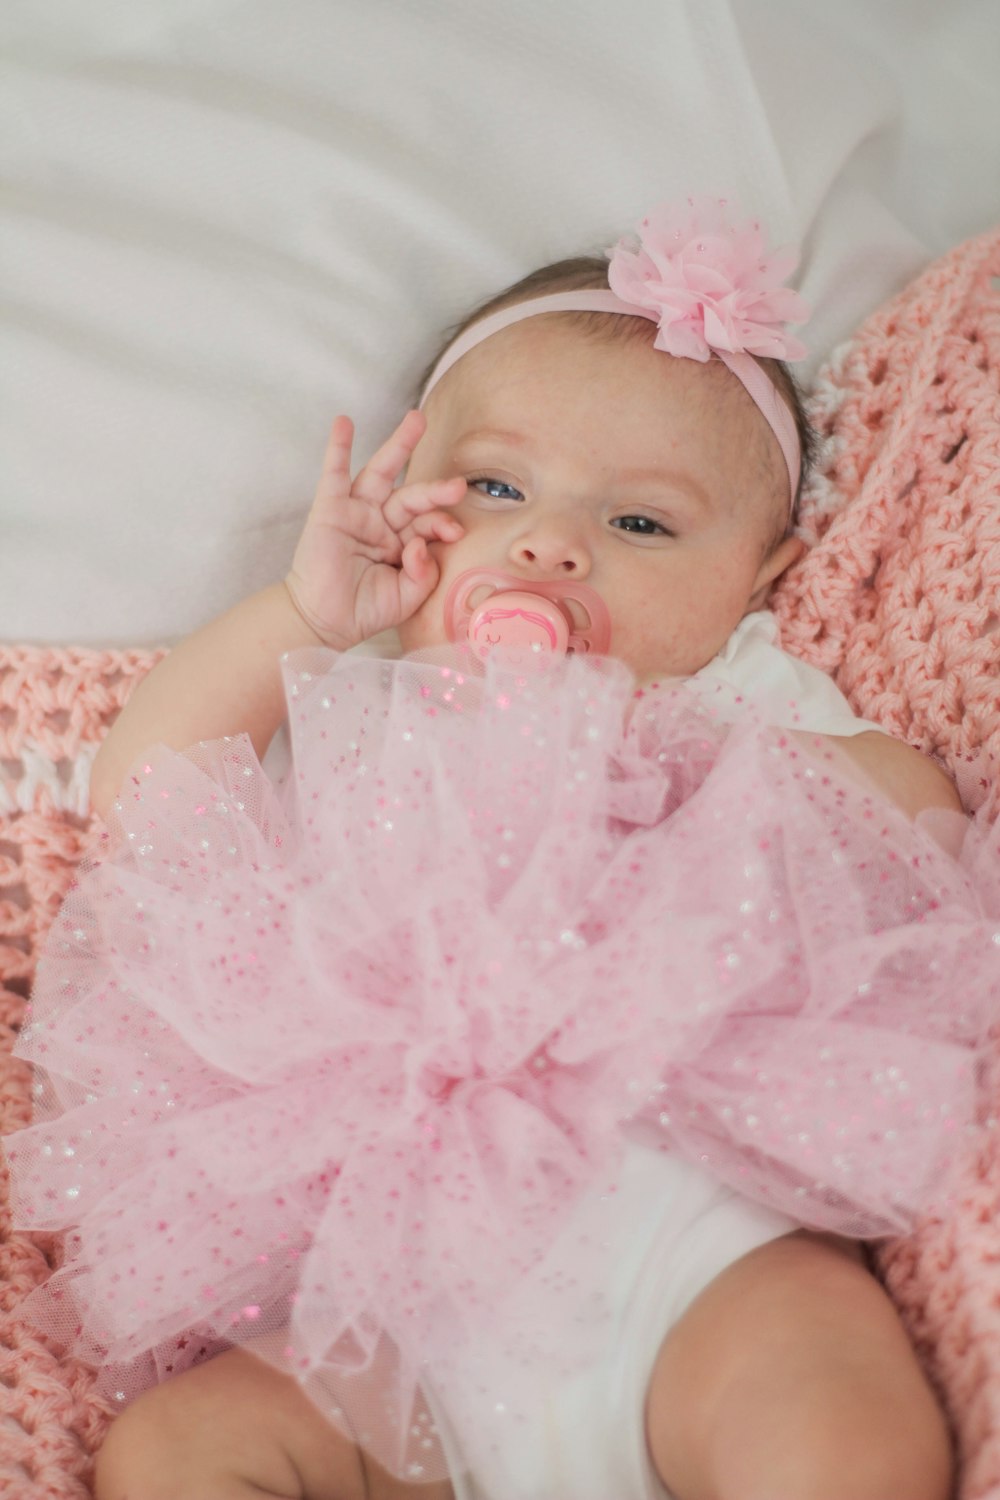 baby in pink and white floral dress lying on white textile